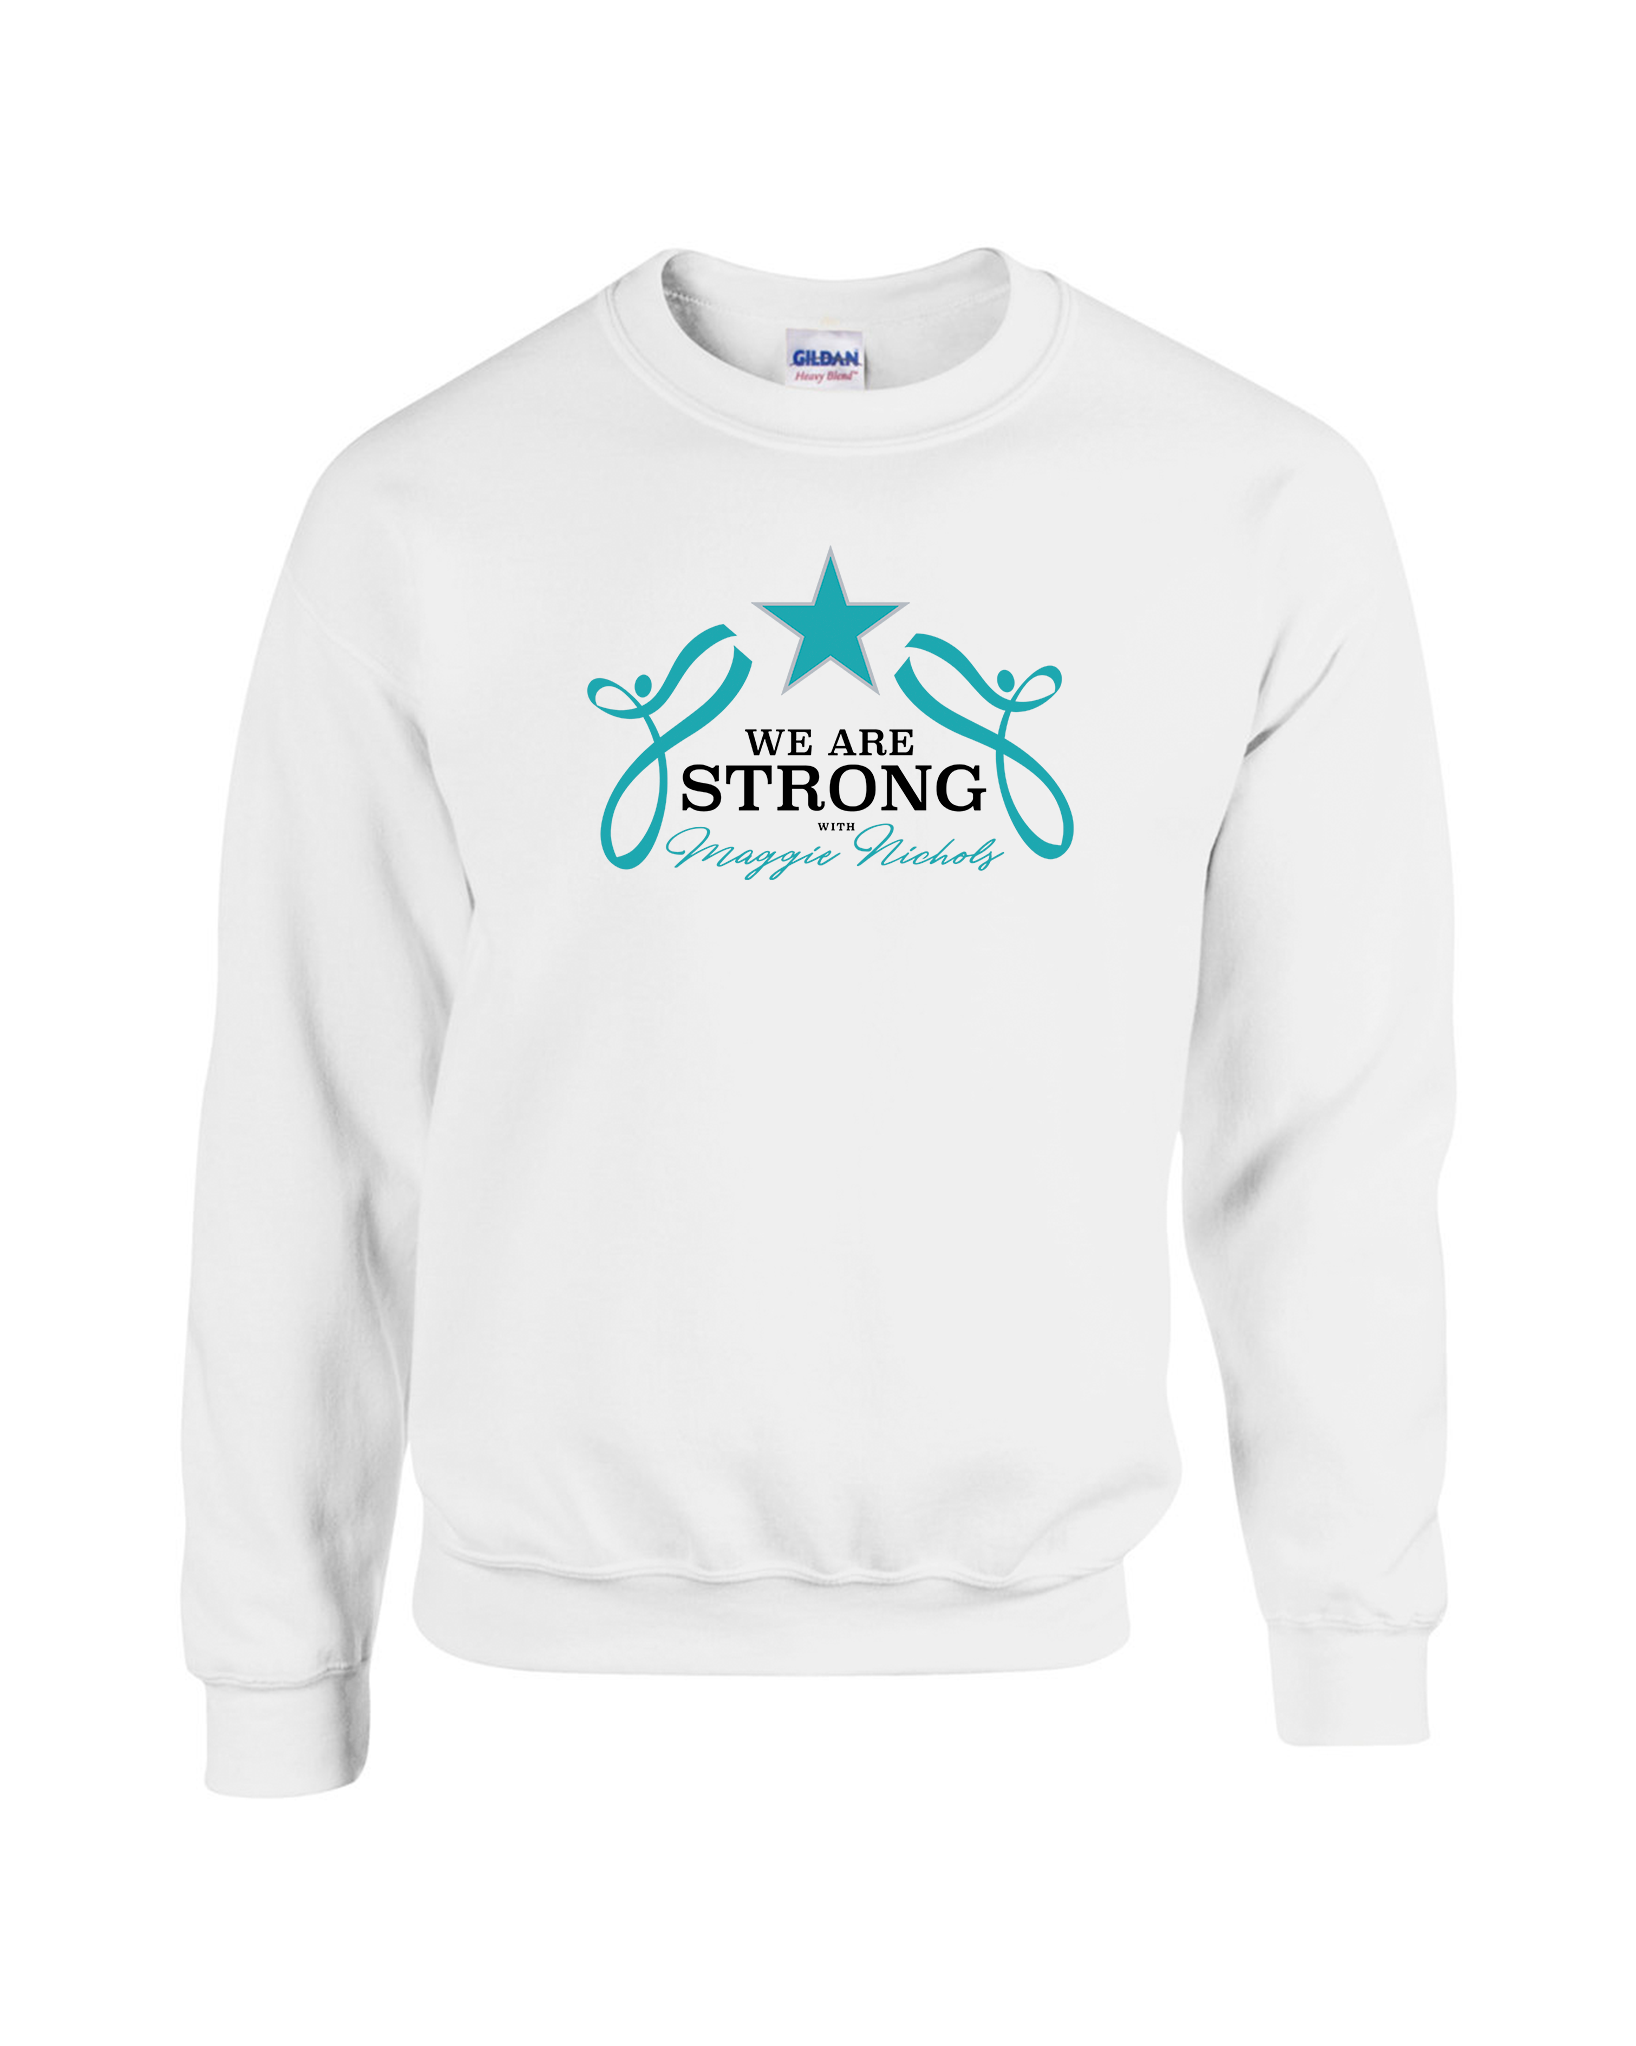 CREW SWEATSHIRT - 2023 We Are Strong with Maggie Nichols